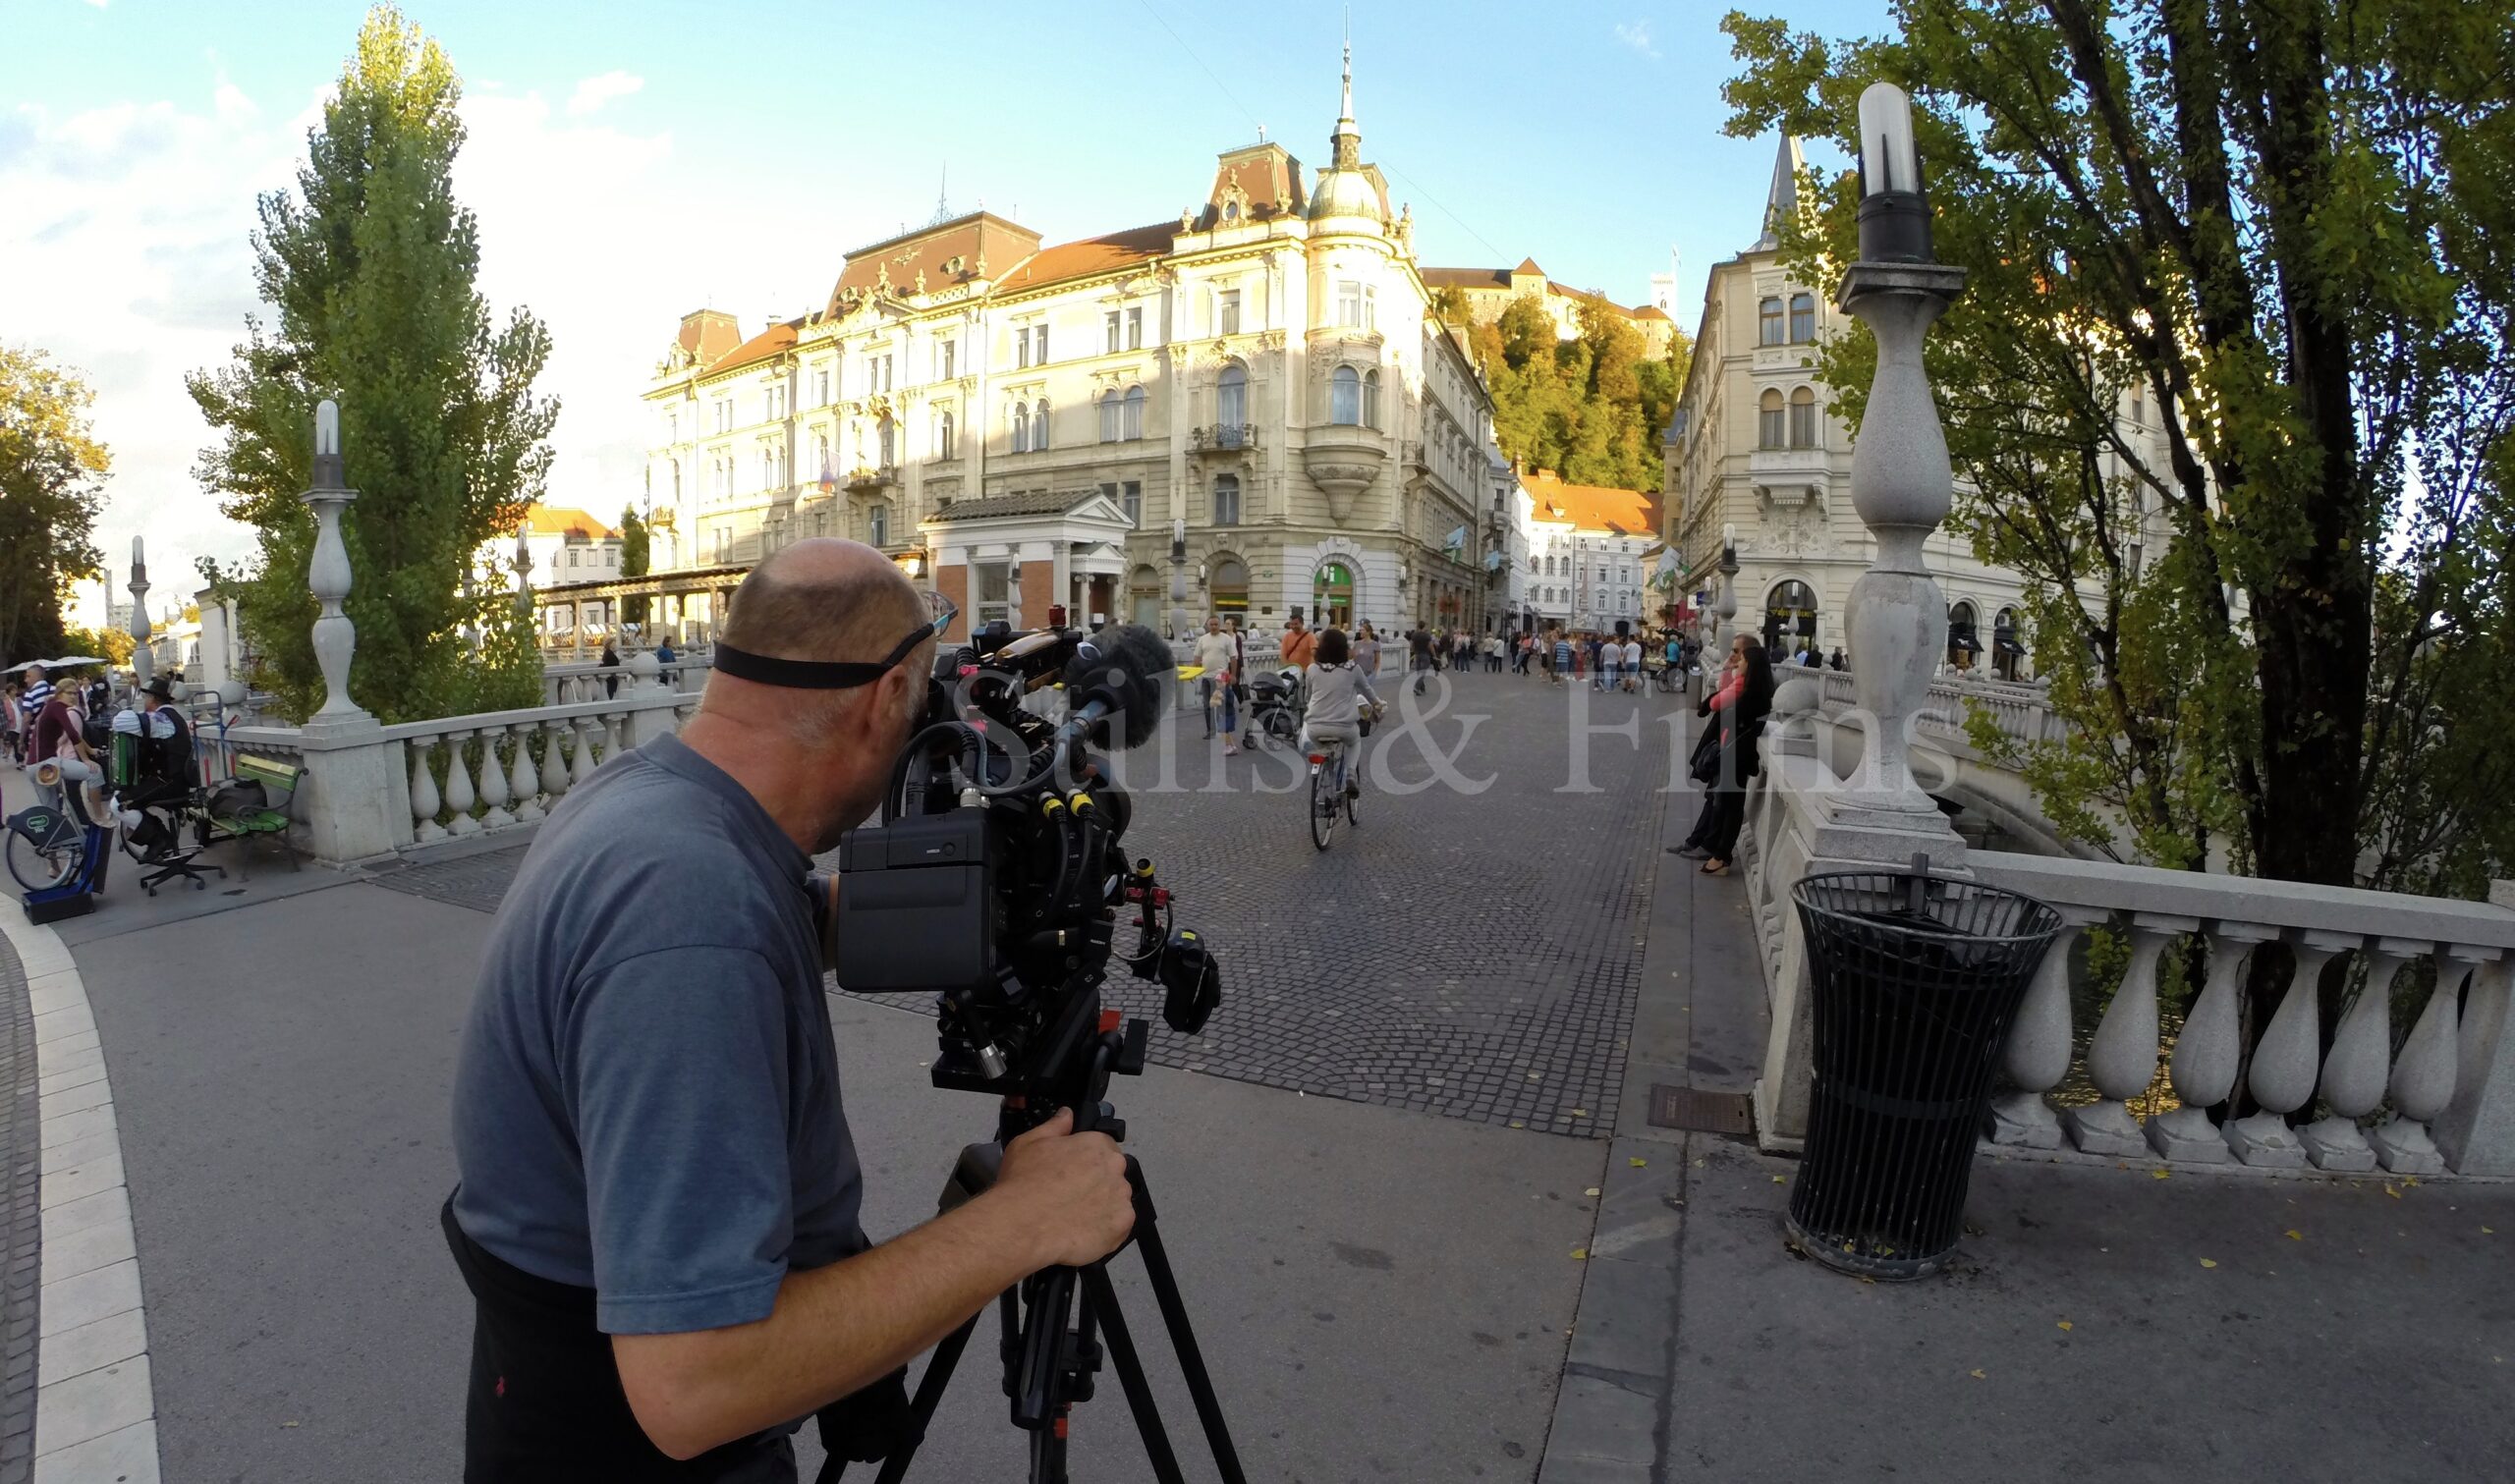 We were filming city b-roll in Ljubljana for a UK production.